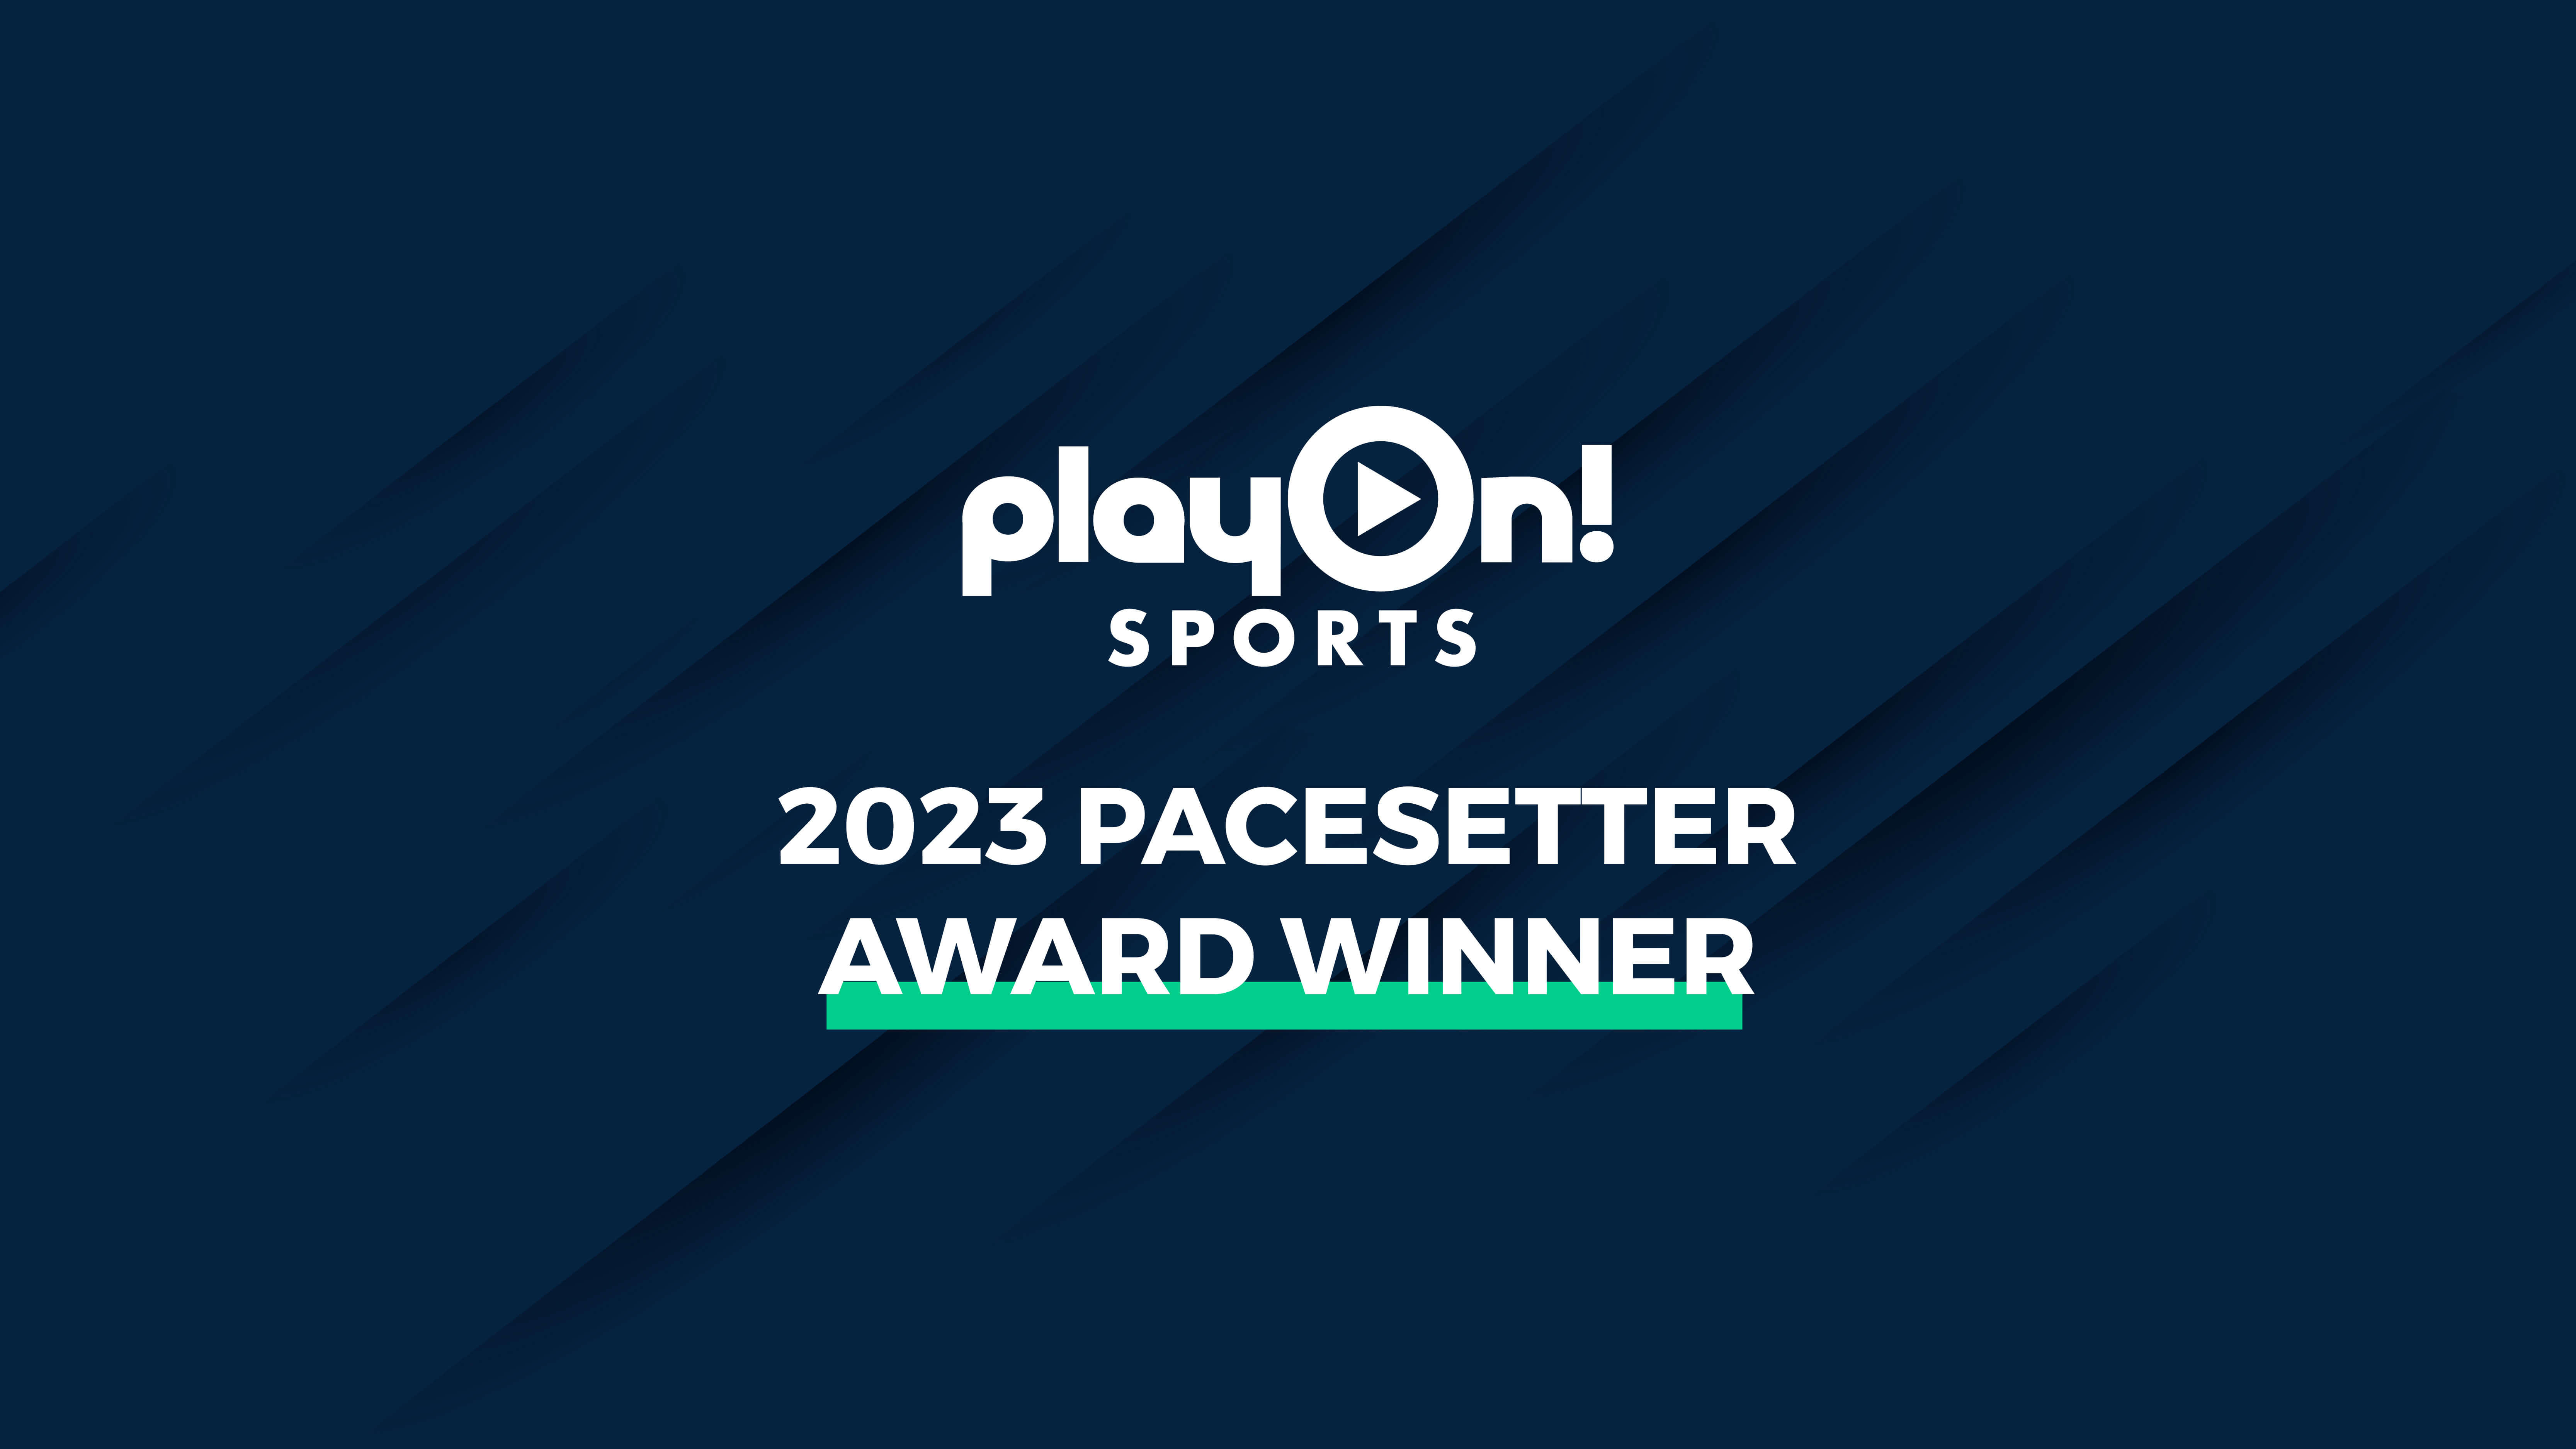 PlayOn! Sports Named a 2023 Pacesetter by Atlanta Business Chronicle